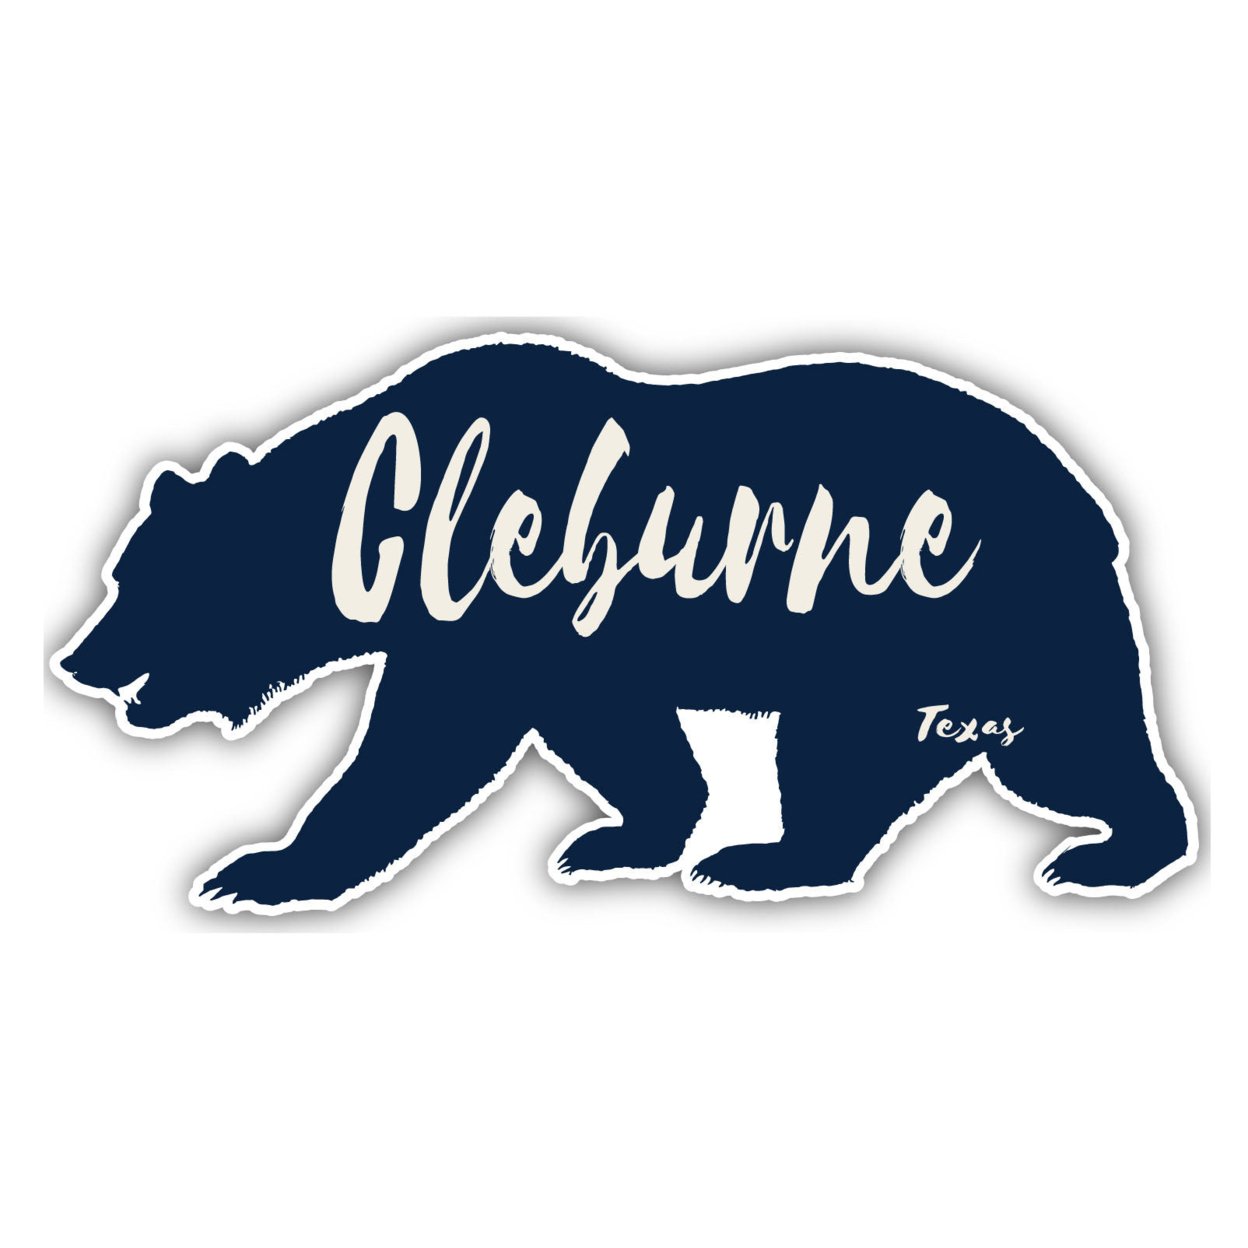 Cleburne Texas Souvenir Decorative Stickers (Choose Theme And Size) - 4-Pack, 10-Inch, Bear